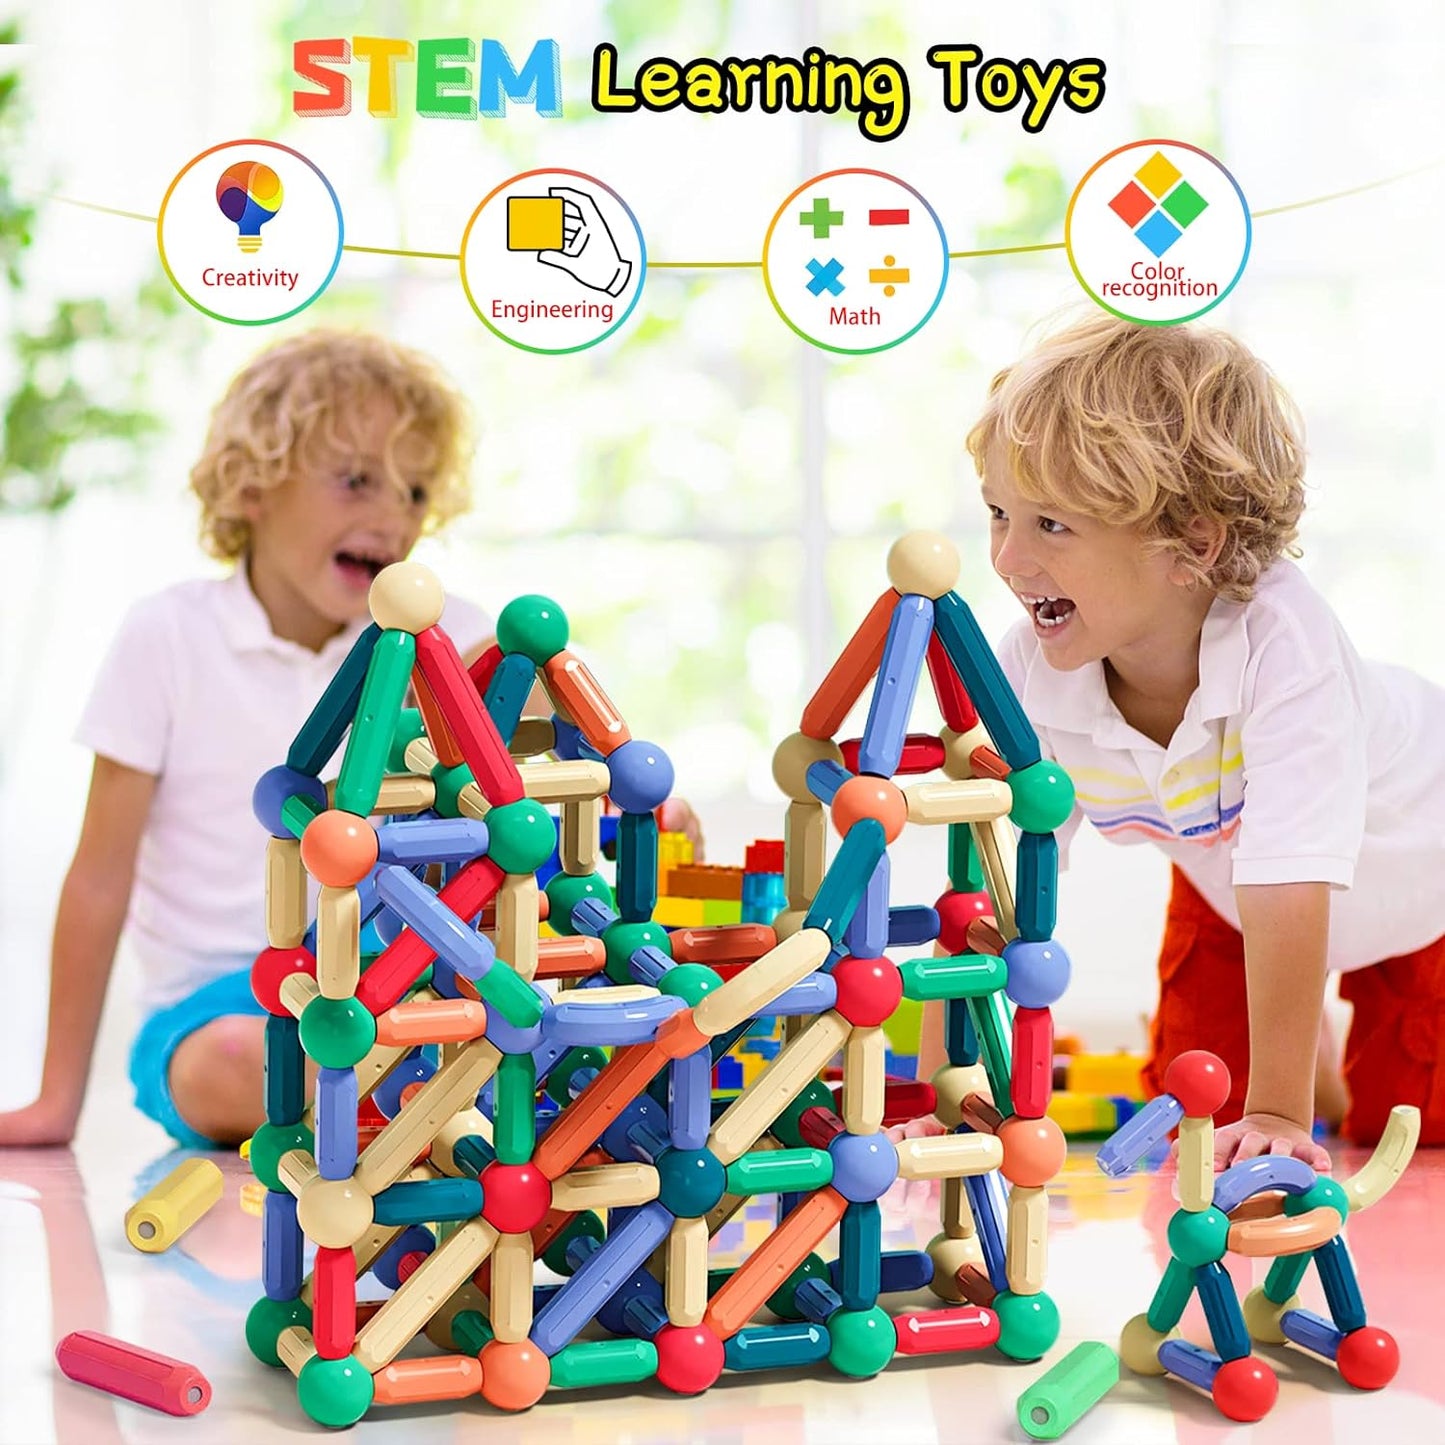 🔥LAST DAY PROMOTION 49% OFF|EDUCATIONAL MAGNET BUILDING BLOCKS